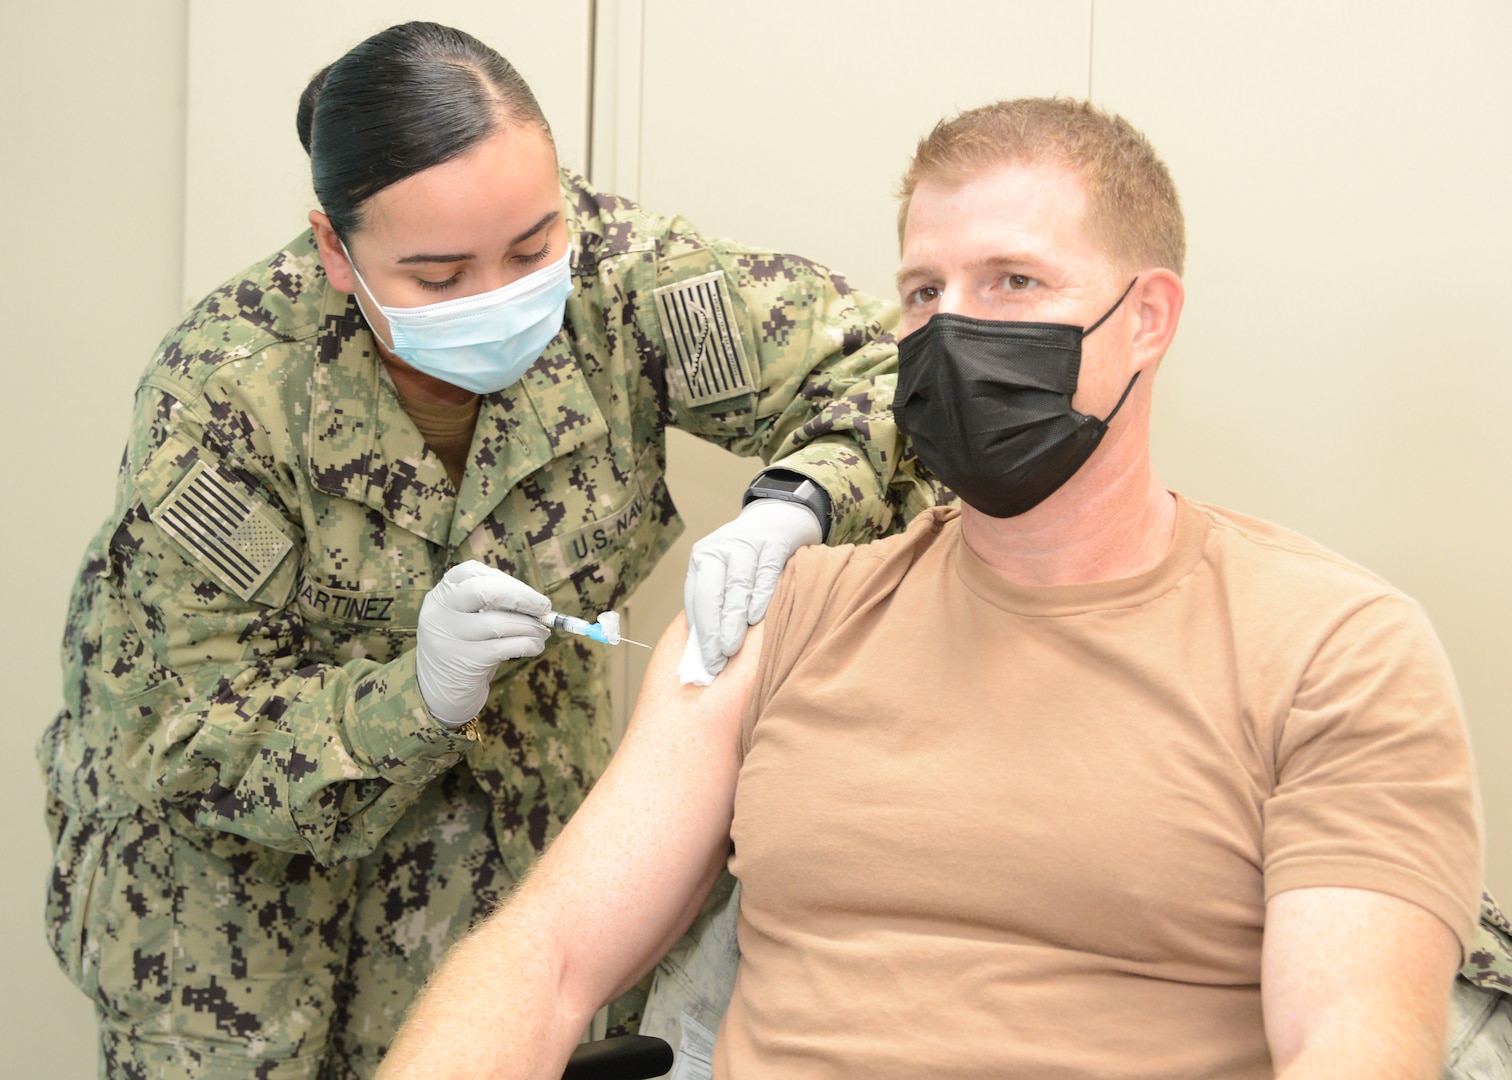 MANAMA, Bahrain (December 30, 2020) Capt. Greg Smith, Naval Support Activity (NSA) Bahrain’s commanding officer, receives the COVID-19 vaccine from Hospital Corpsman 2nd Class Rose Martinez. The vaccine is being administered in phases based on priority levels to reduce the burden of COVID-19 in high-risk populations and simultaneously mitigate risk to military operations. (U.S. Navy photo by Mass Communication Specialist 1st Class Justin Yarborough/Released)